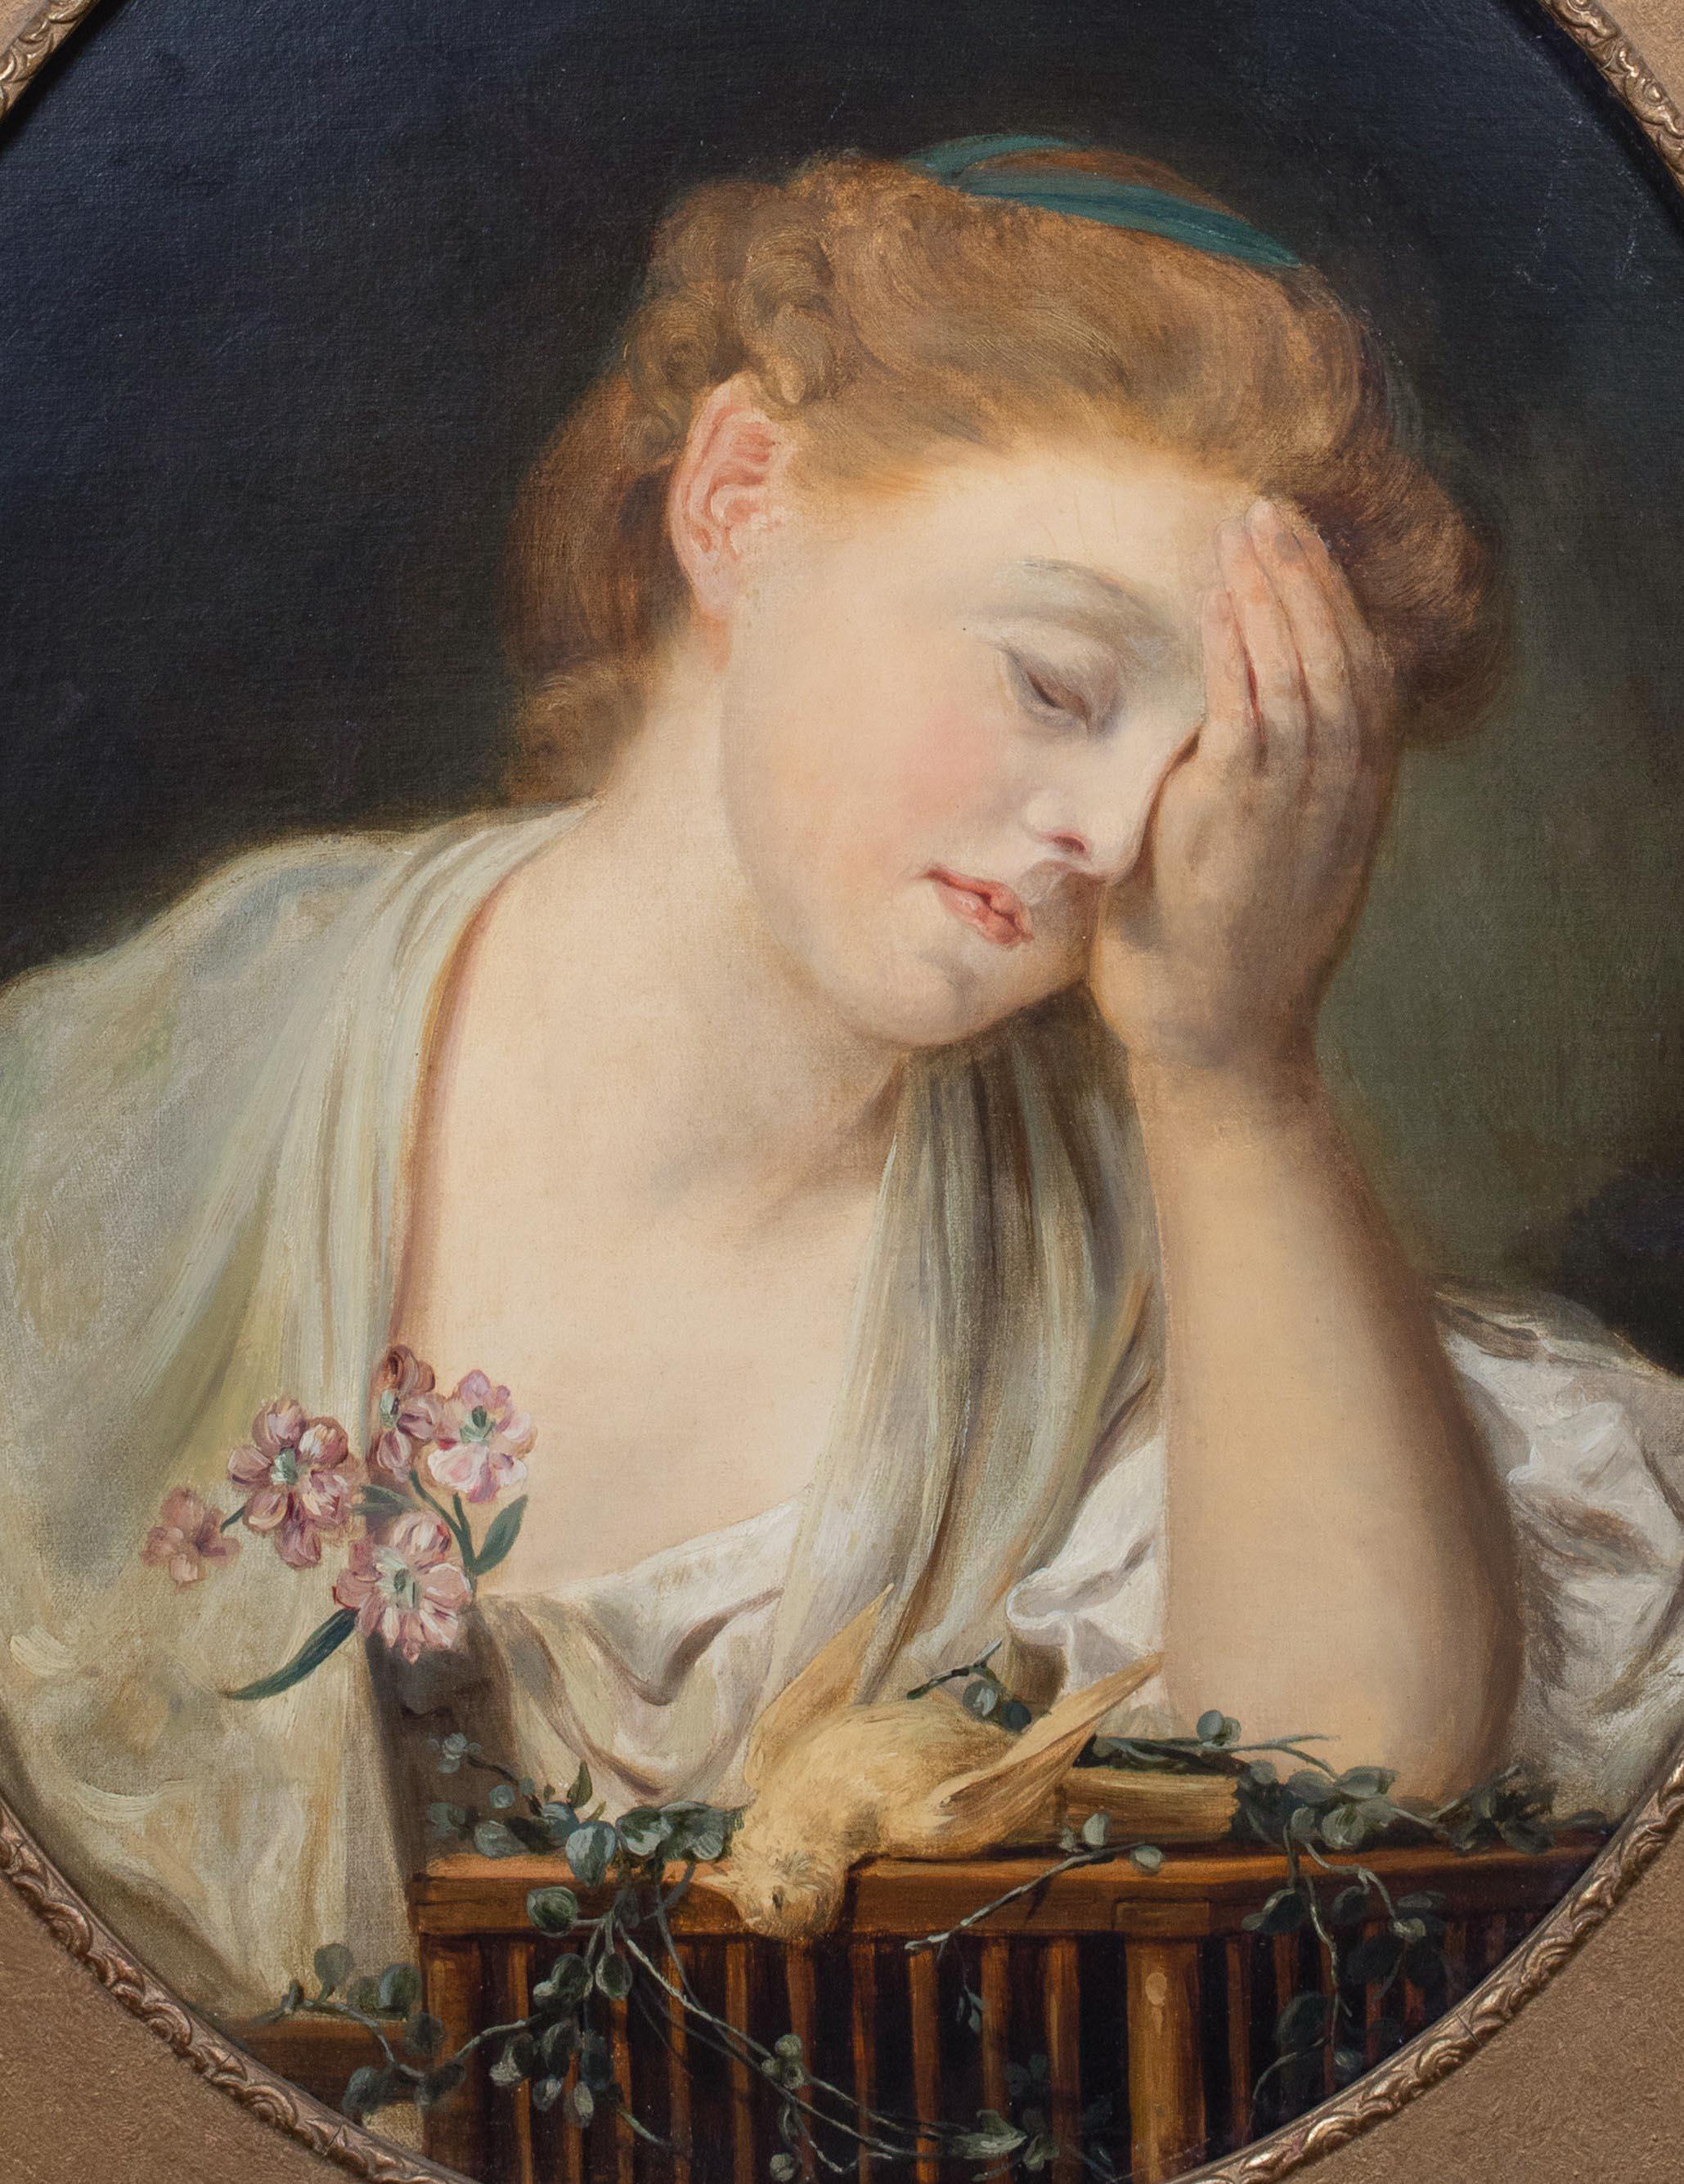 The Dead Canary, 18th Century

circle of Jean-Baptiste Greuze (1725-1805)

18th Century French School portrait of a girl and her dead canary, oil on canvas. Beautiful oval study of the girl distraught at the discovery of her pet canaries death.